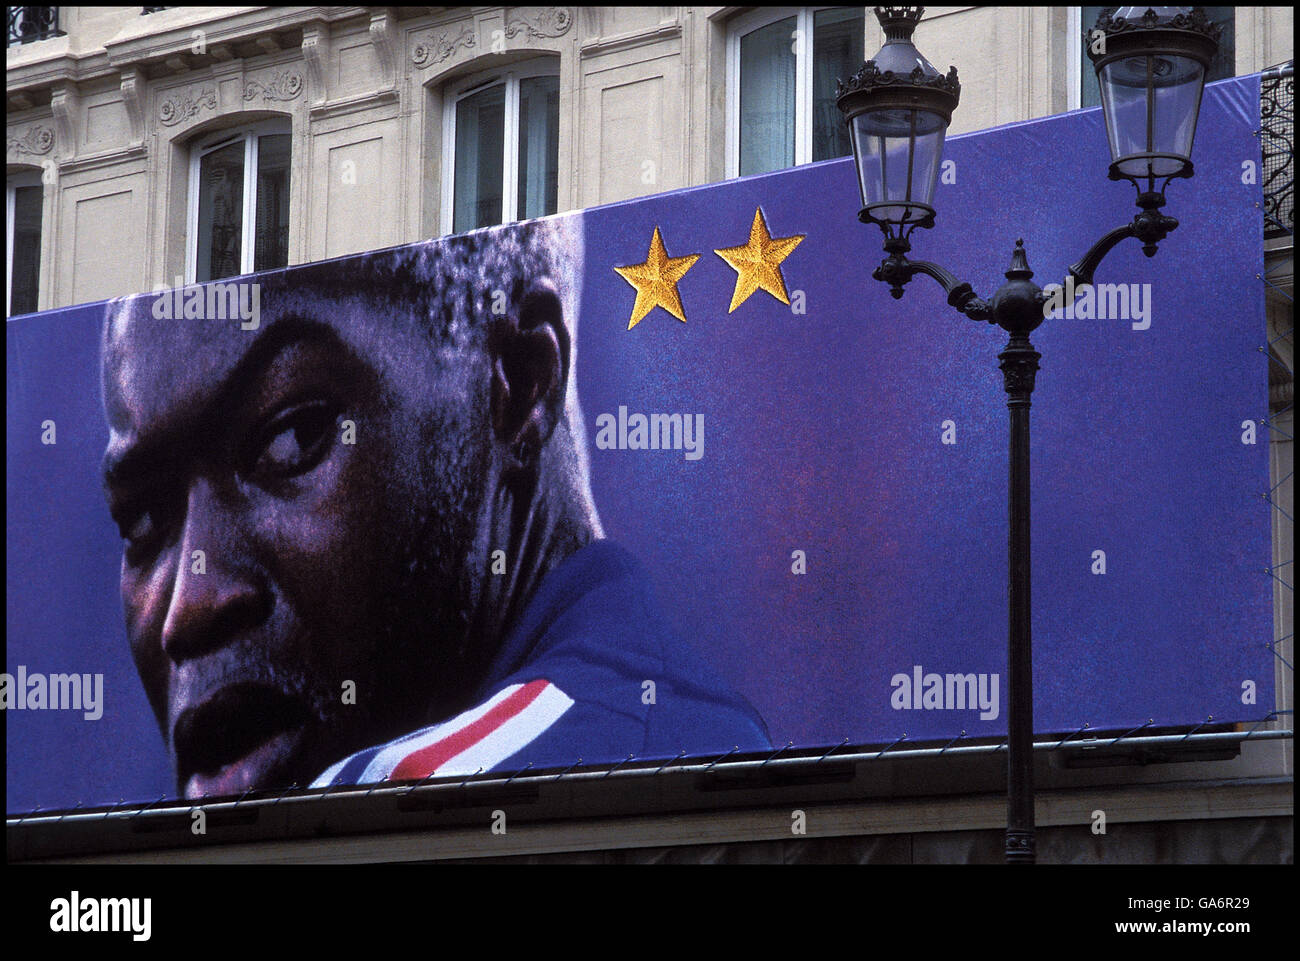 The face of French soccer player Djibril Cissé is seen on Adidas advertisement in Paris, France, June 2002. Stock Photo